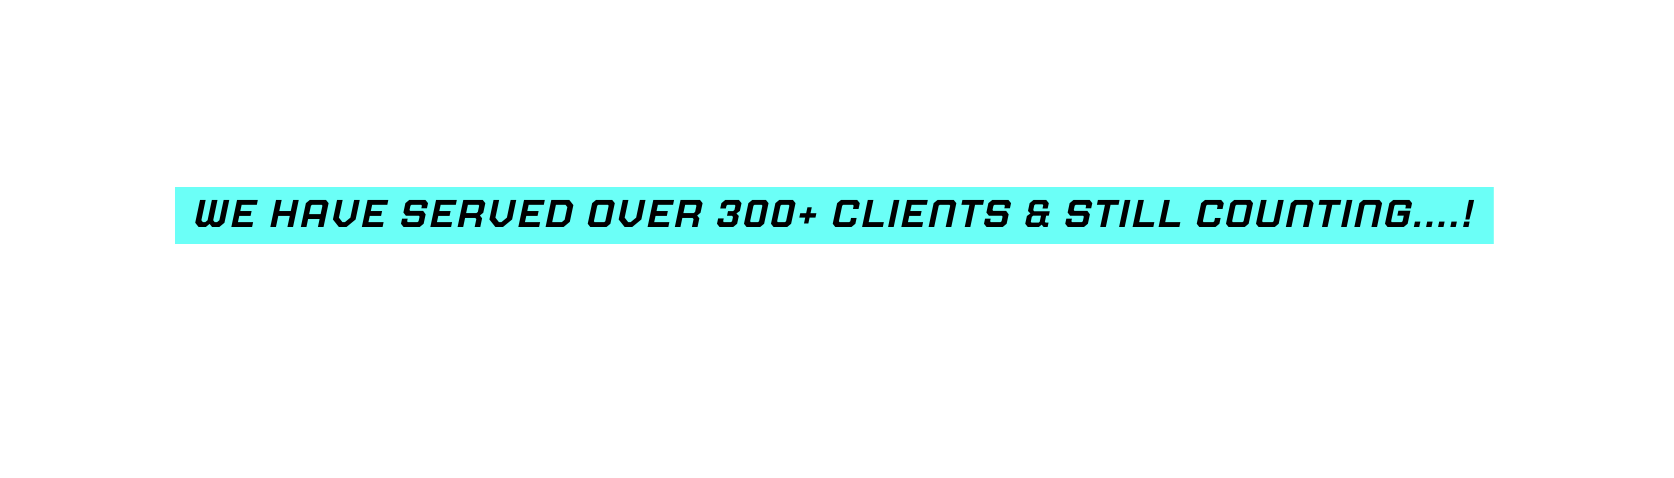 We Have Served Over 300 Clients Still counting